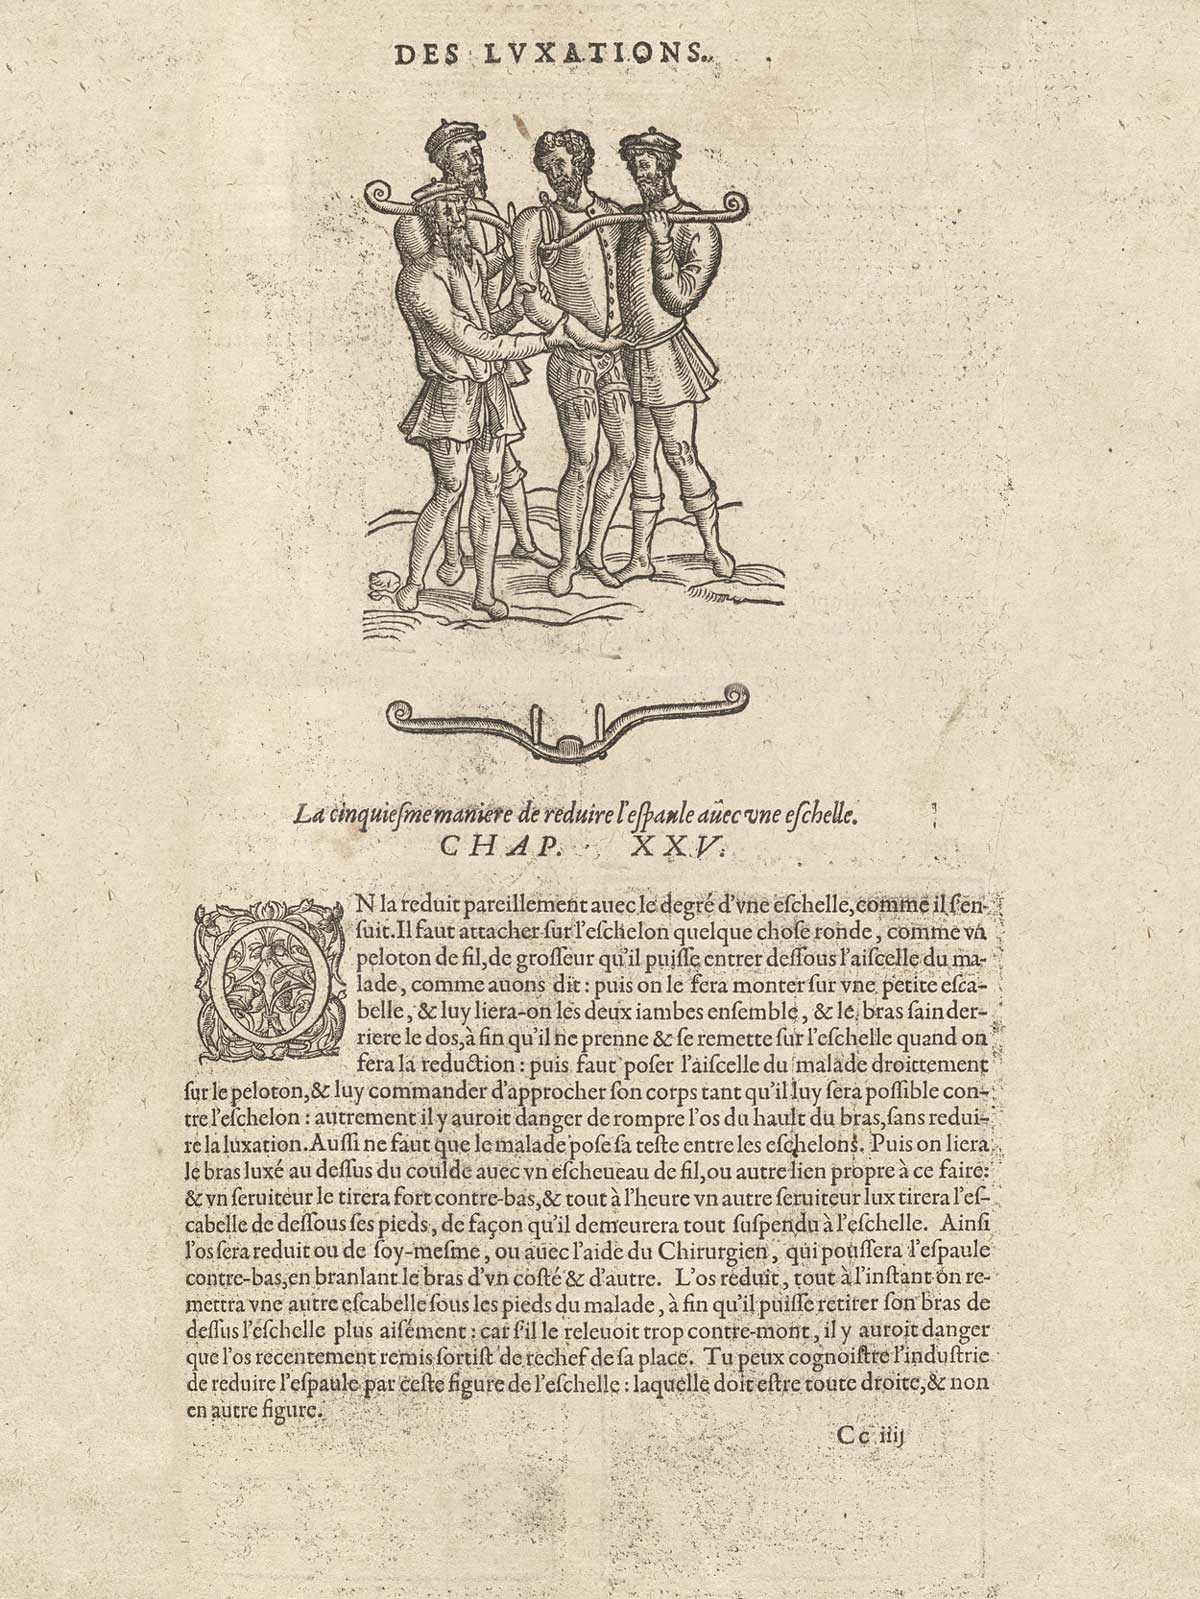 Page VCLXXVII which features three men attempting to repair a shoulder disclocation of a fourth man using a ladder (eschelle) with descriptive text.